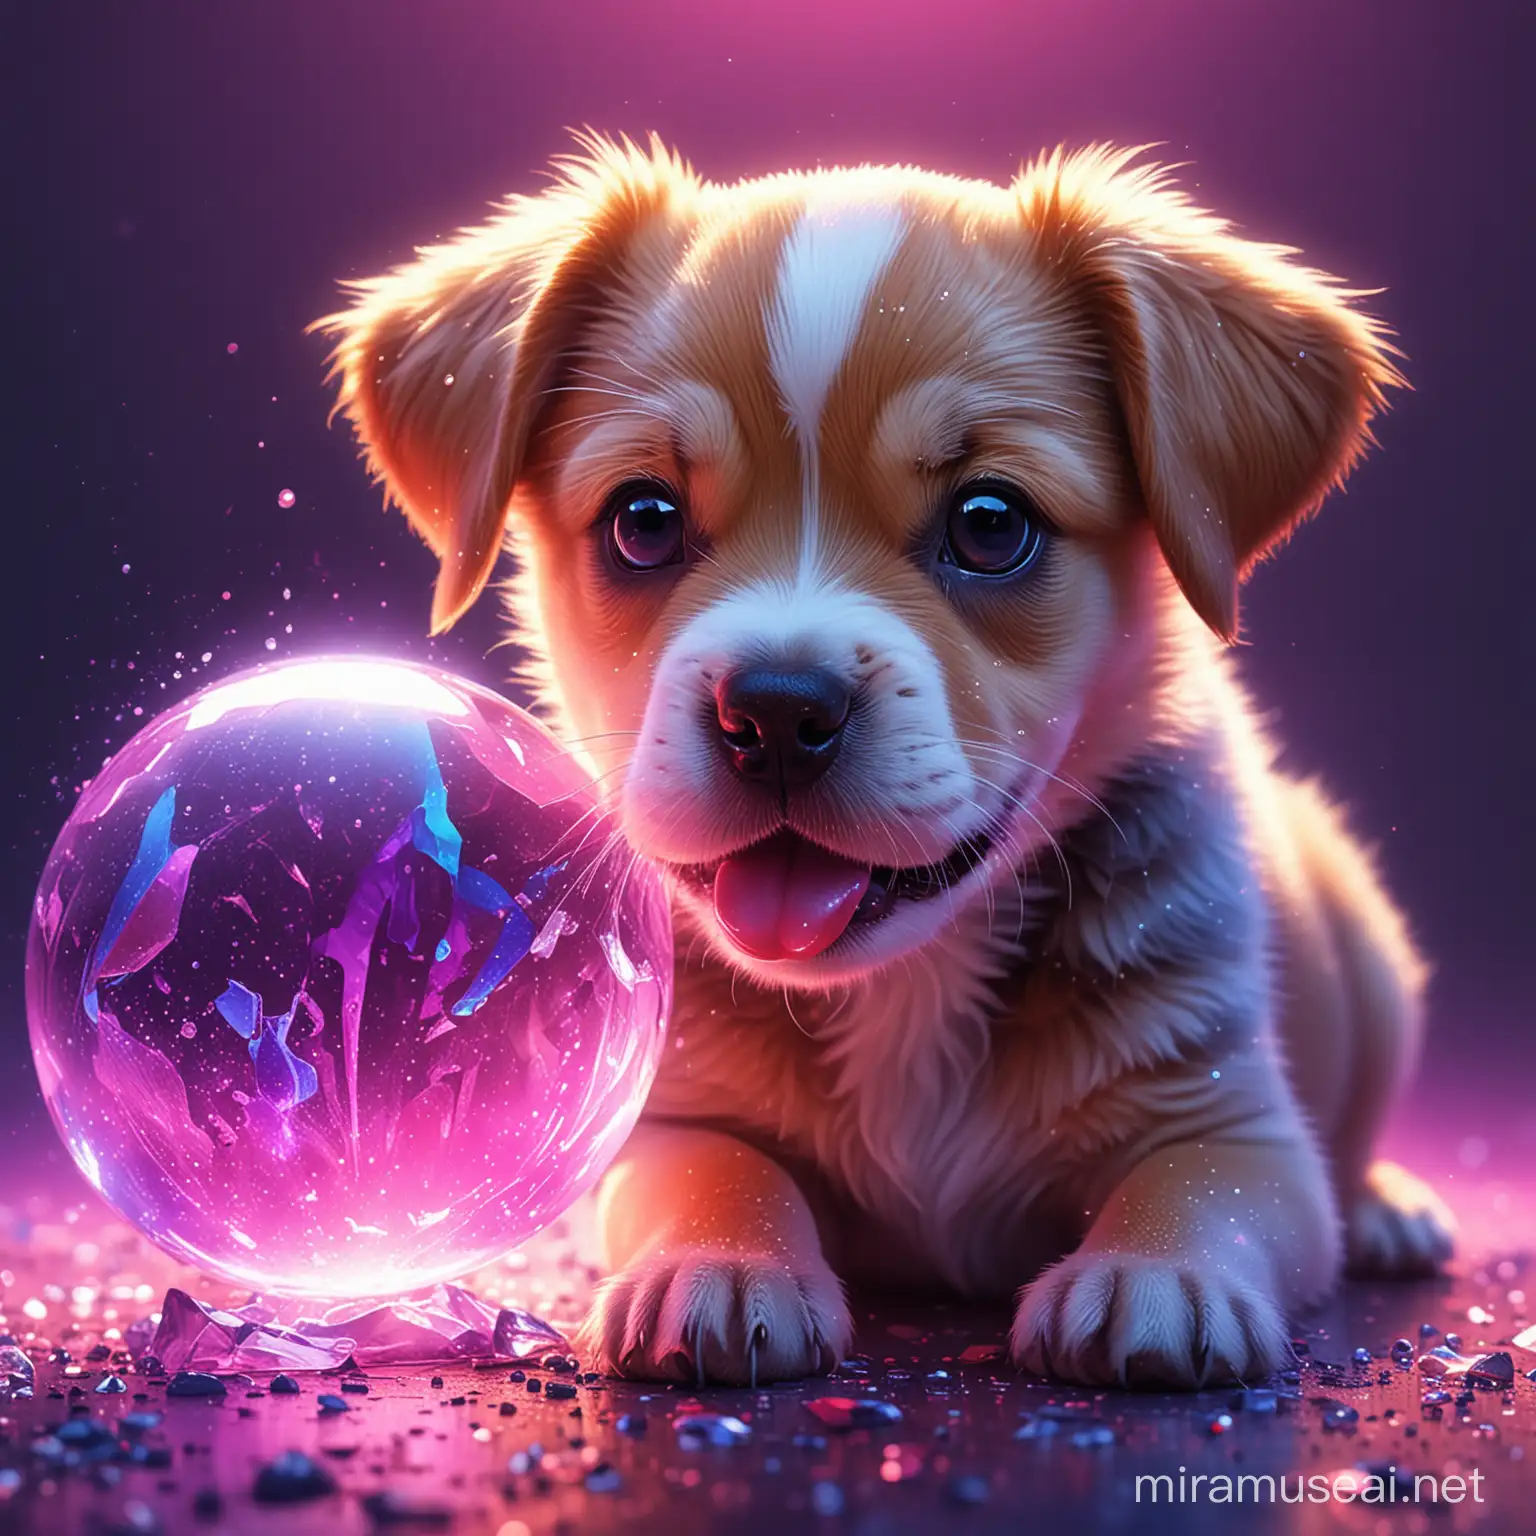 Puppy with tongue out, orb, crystal ball, HD, high resolution, vibrant, glass, colored light, dew, glowing neon, colorful, digital painting, digital illustration, extreme detail, digital art, 4k, ultra hd